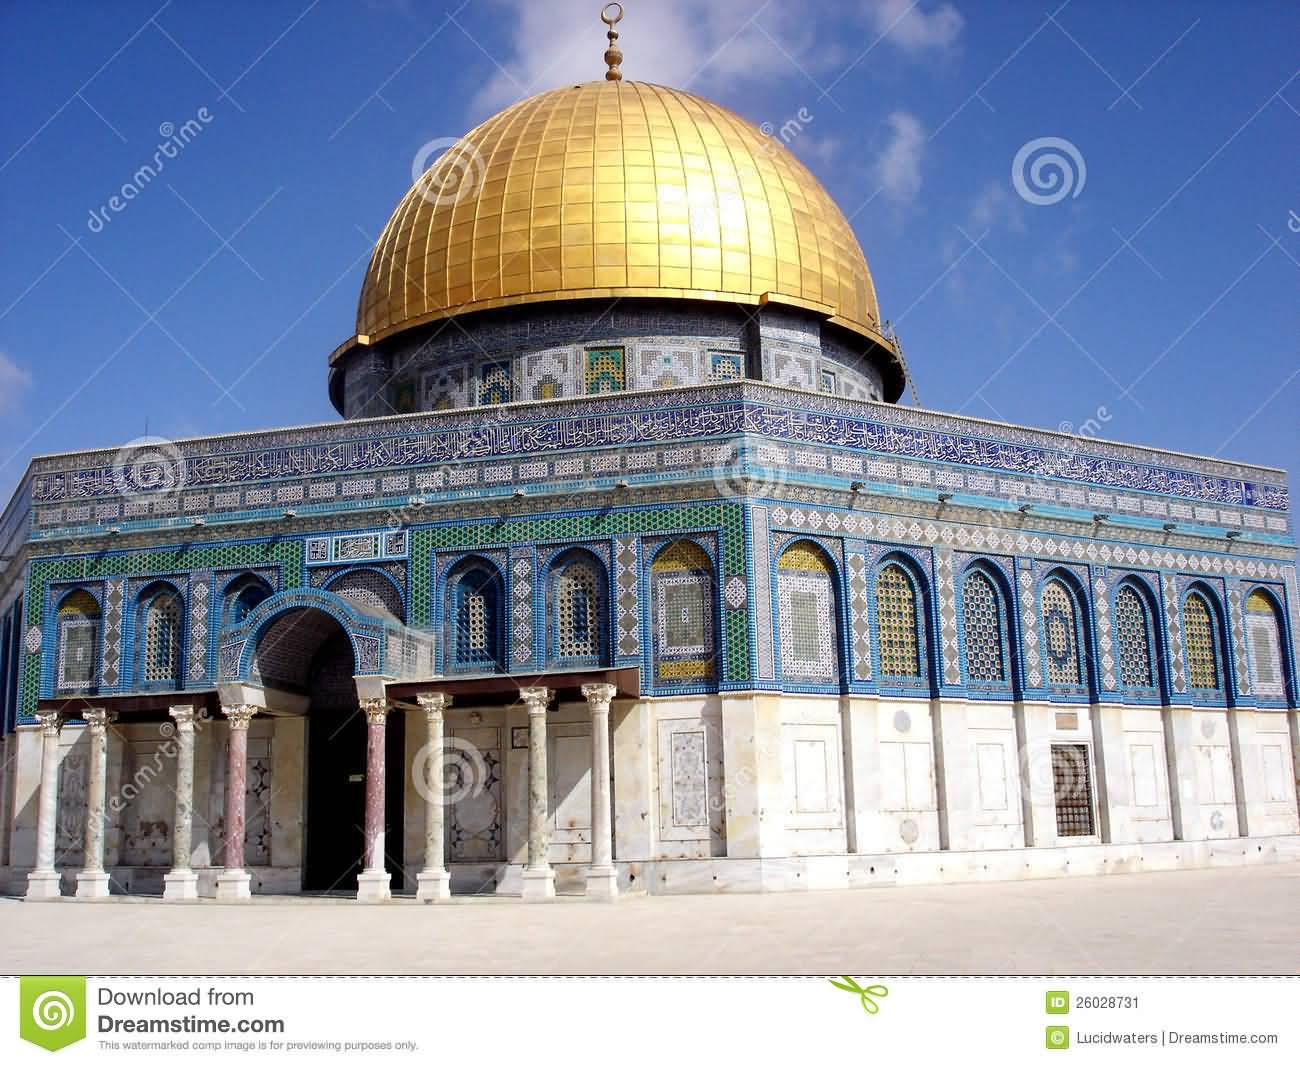 The Golden Dome Mosque Or Dome Of The Rock